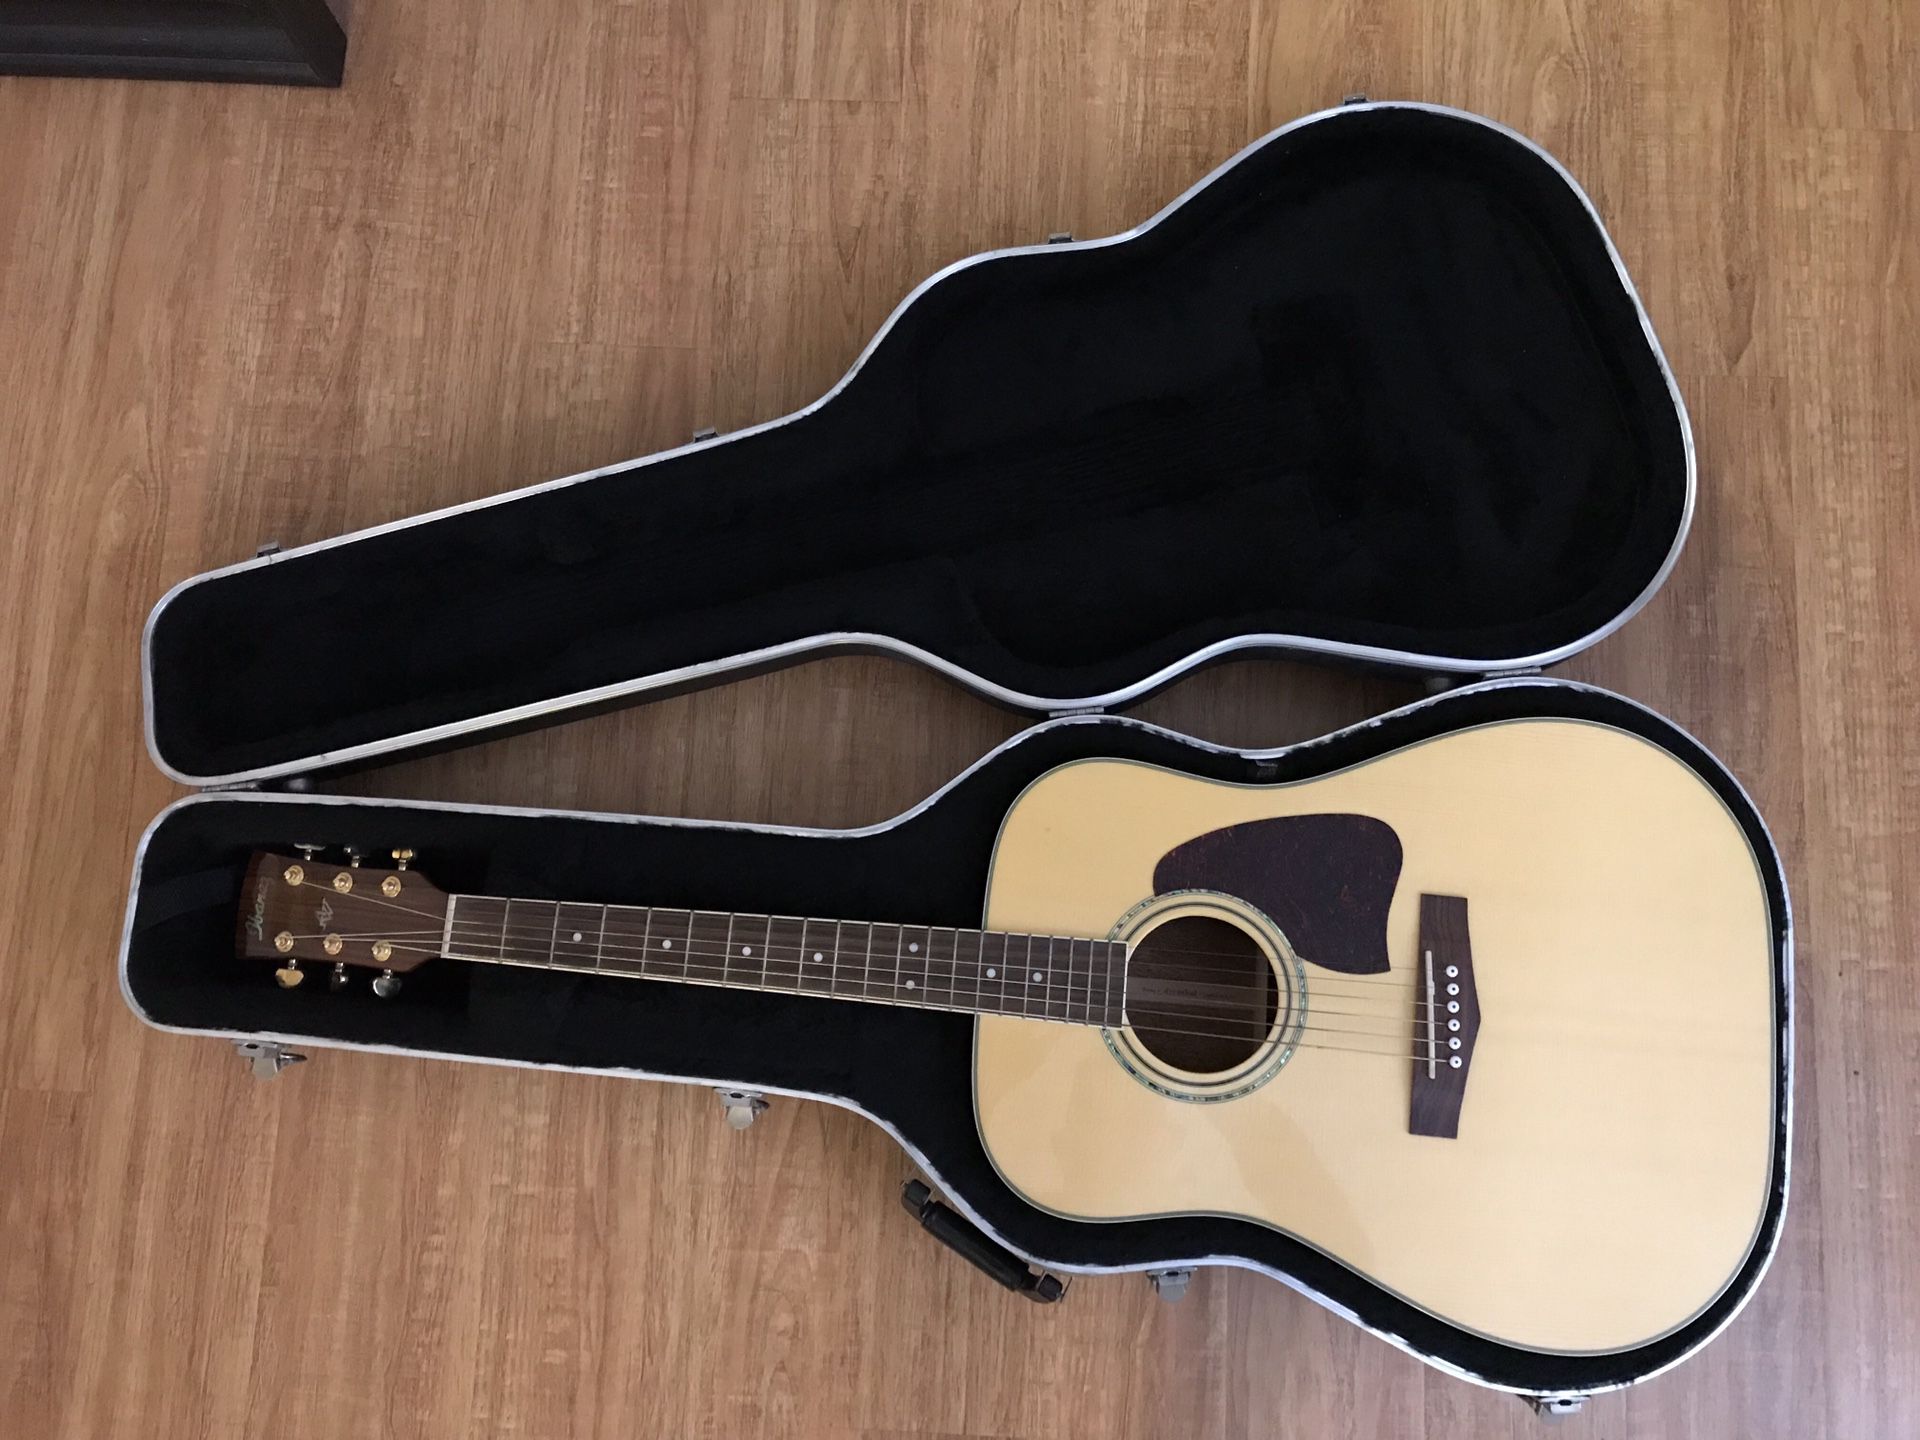 Ibanez Acoustic Guitar and case